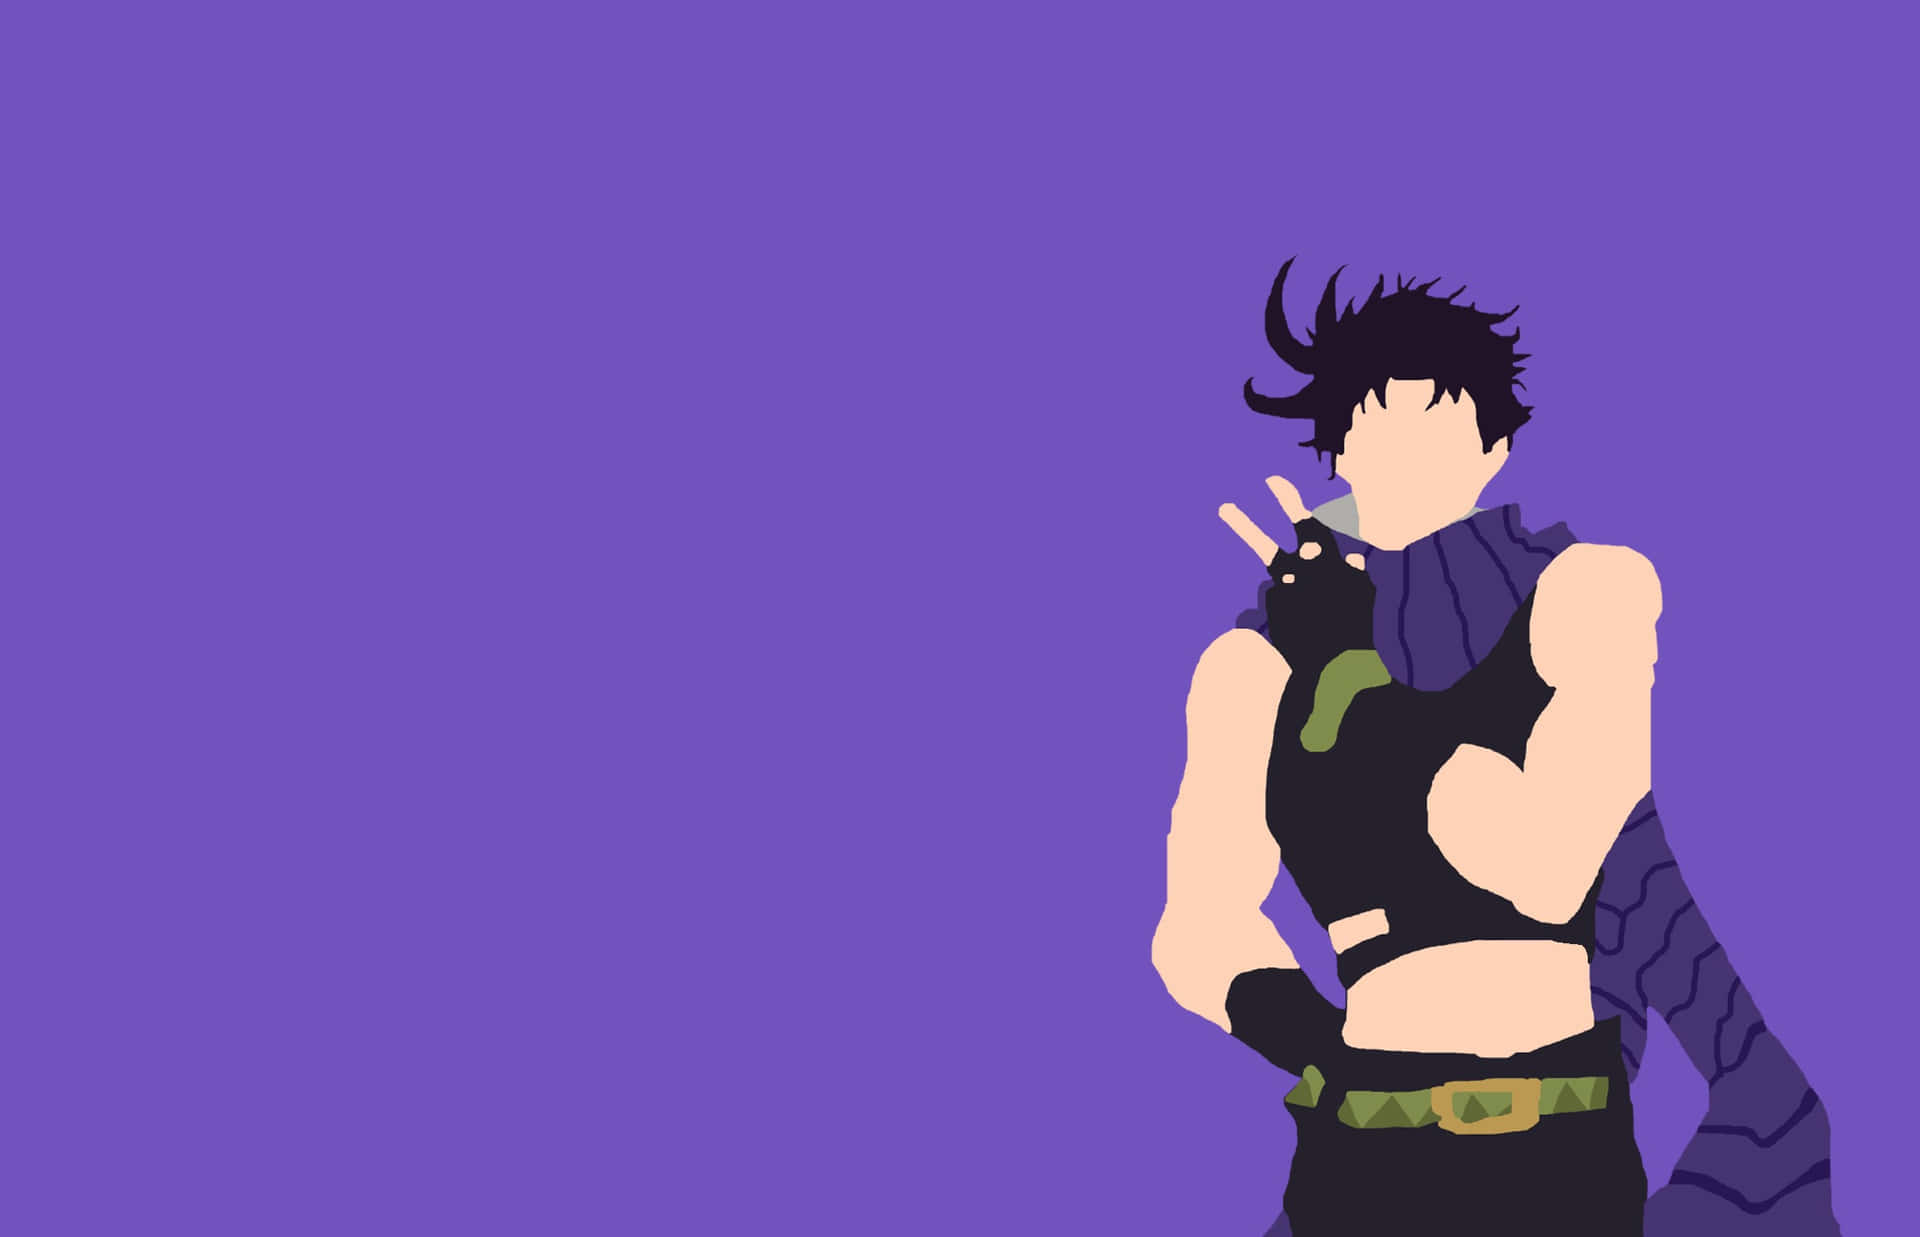 Exciting action-packed moments in Battle Tendency with our favorite characters. Wallpaper